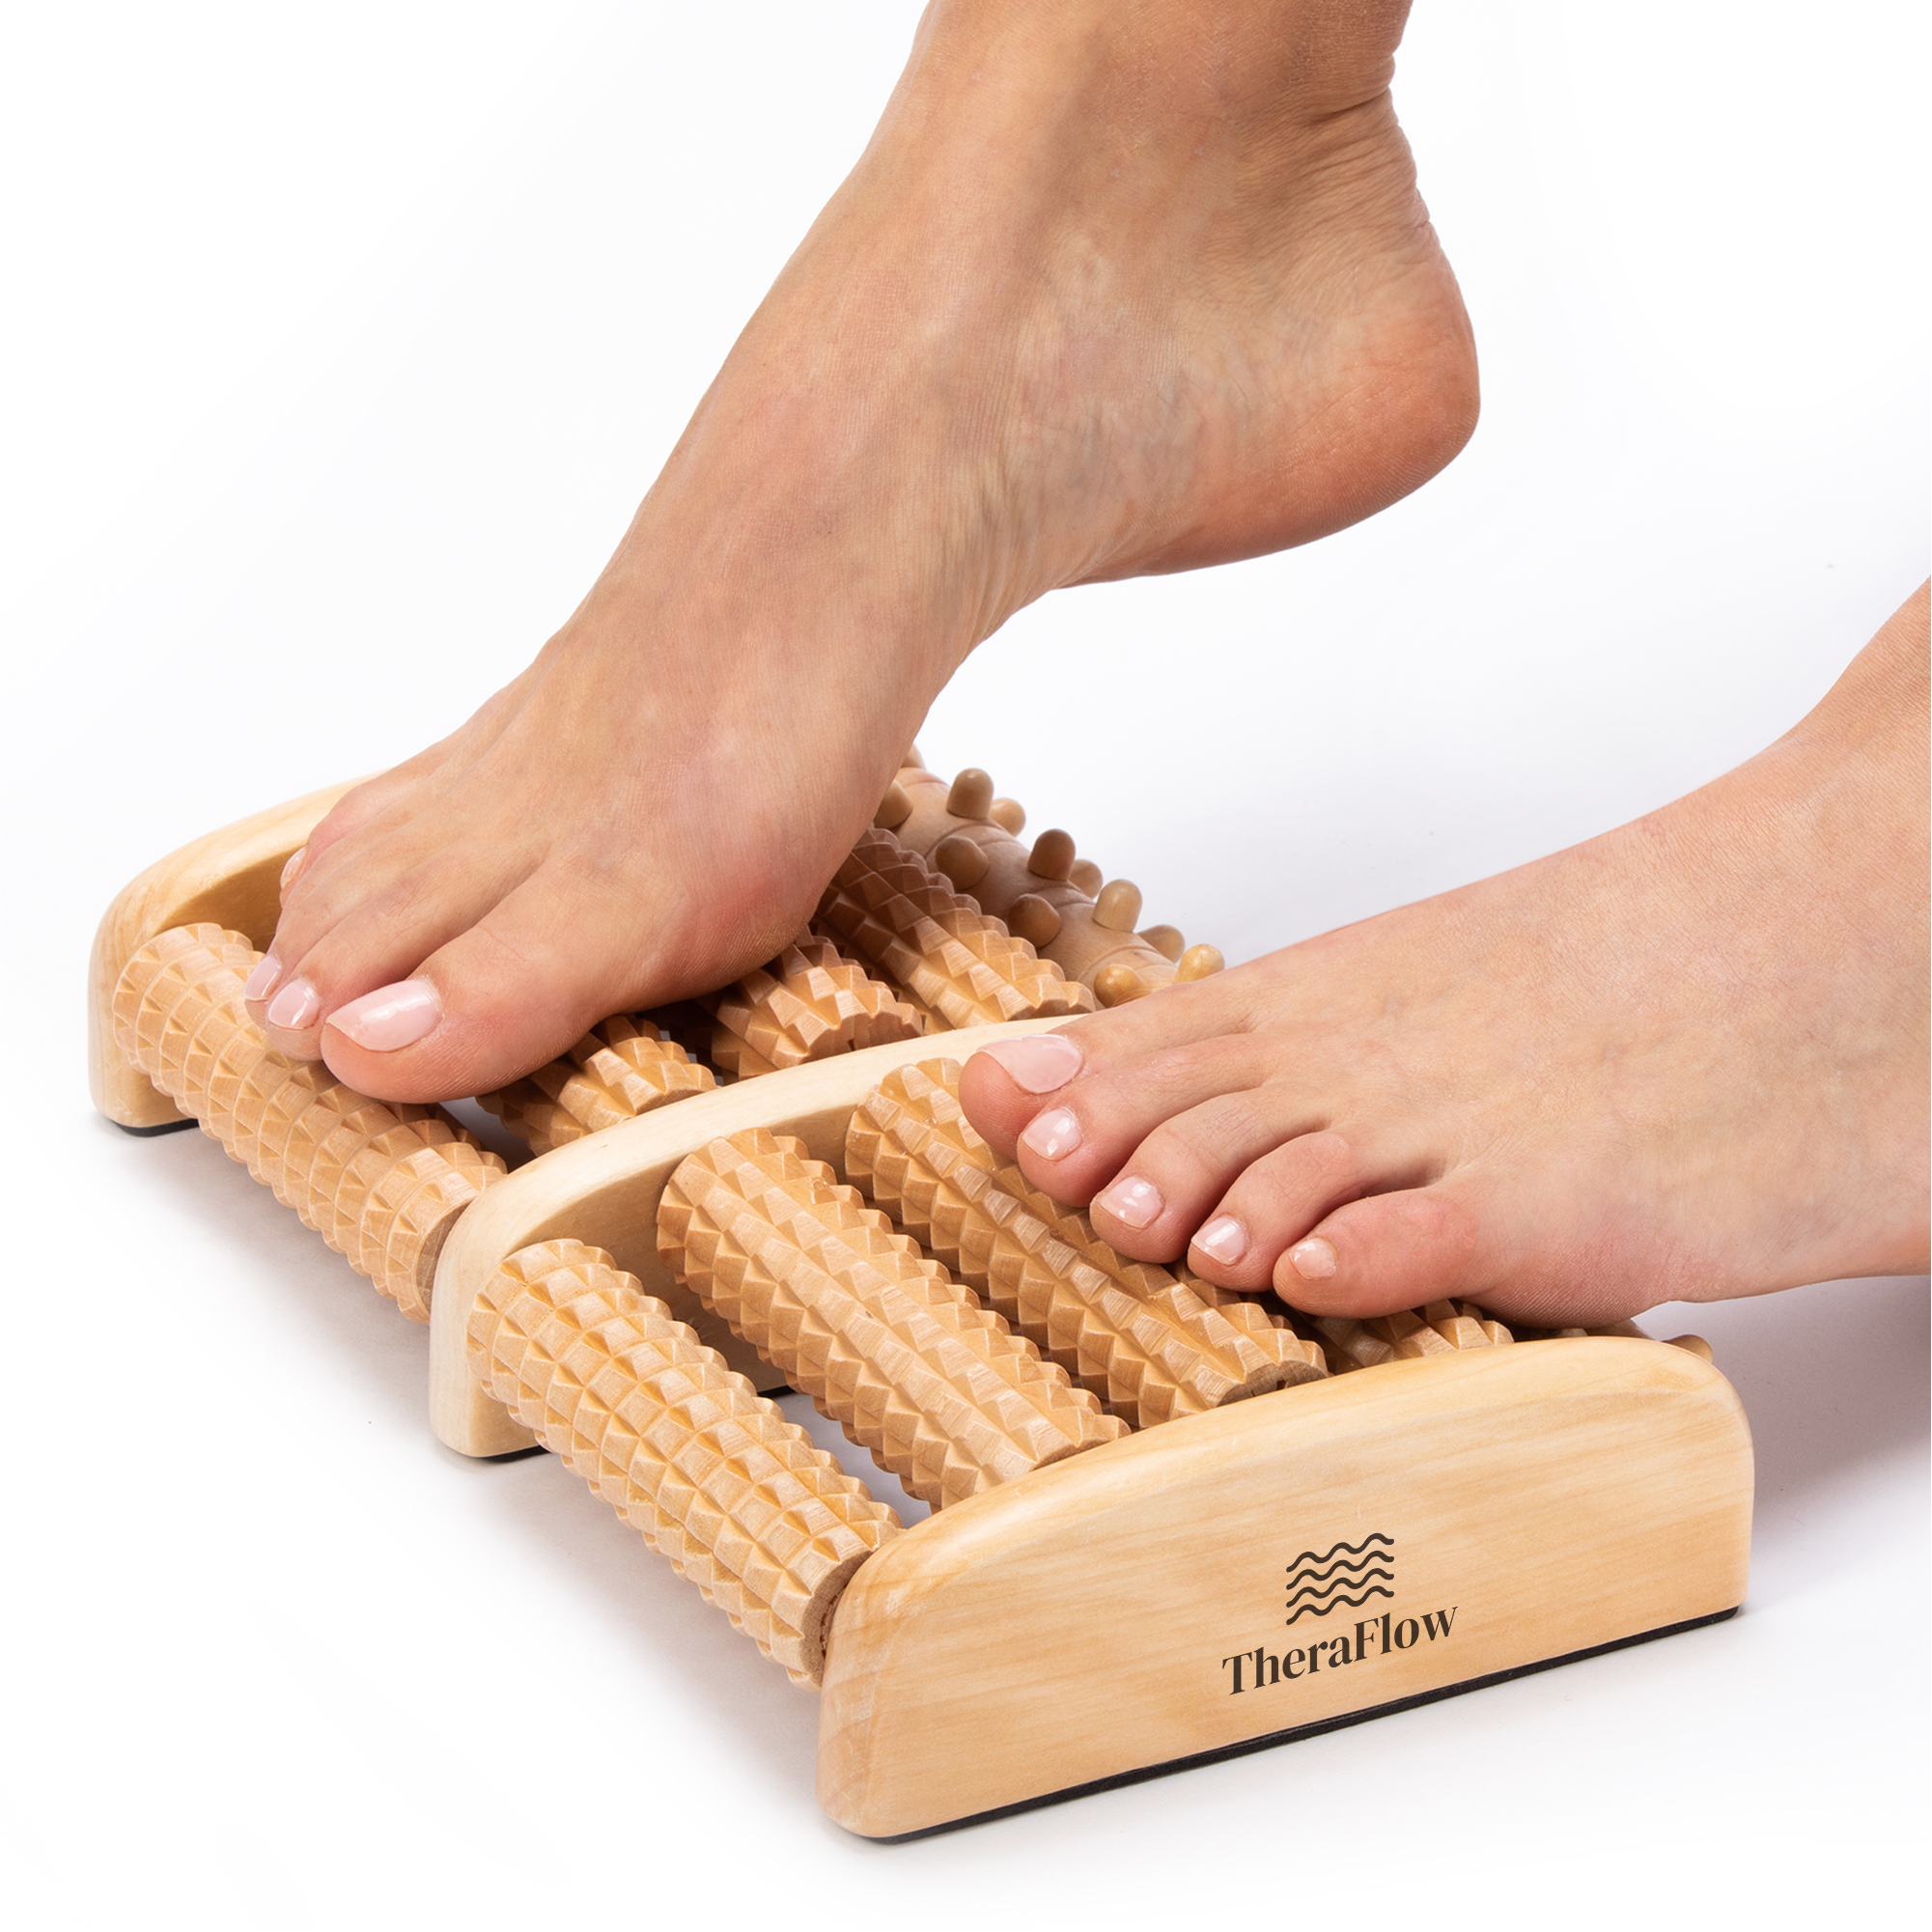 Theraflow Dual Wooden Foot Massager for Women and Men - image 1 of 7